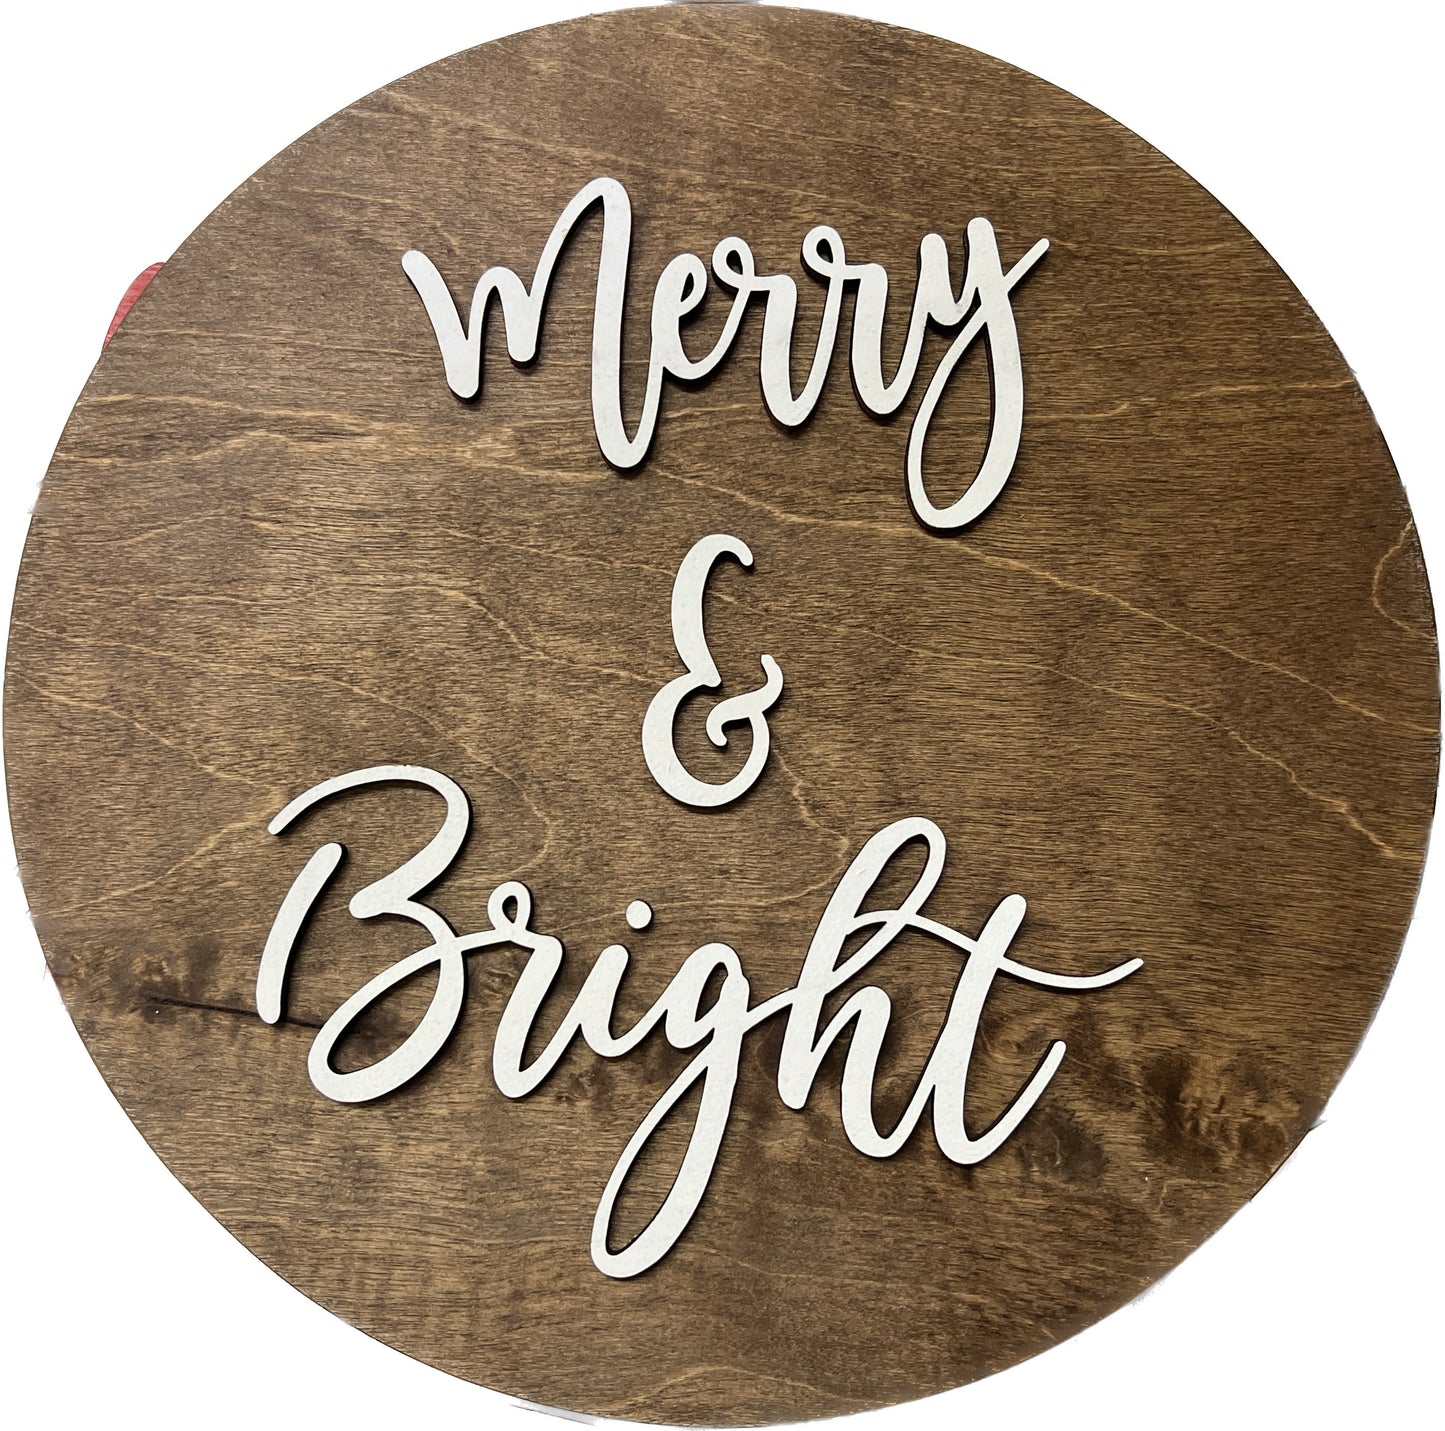 Merry & bright sign, Christmas decorations, 3D holiday decor, wood signs, living room wooden sign wall hanging, front porch or mantel decor